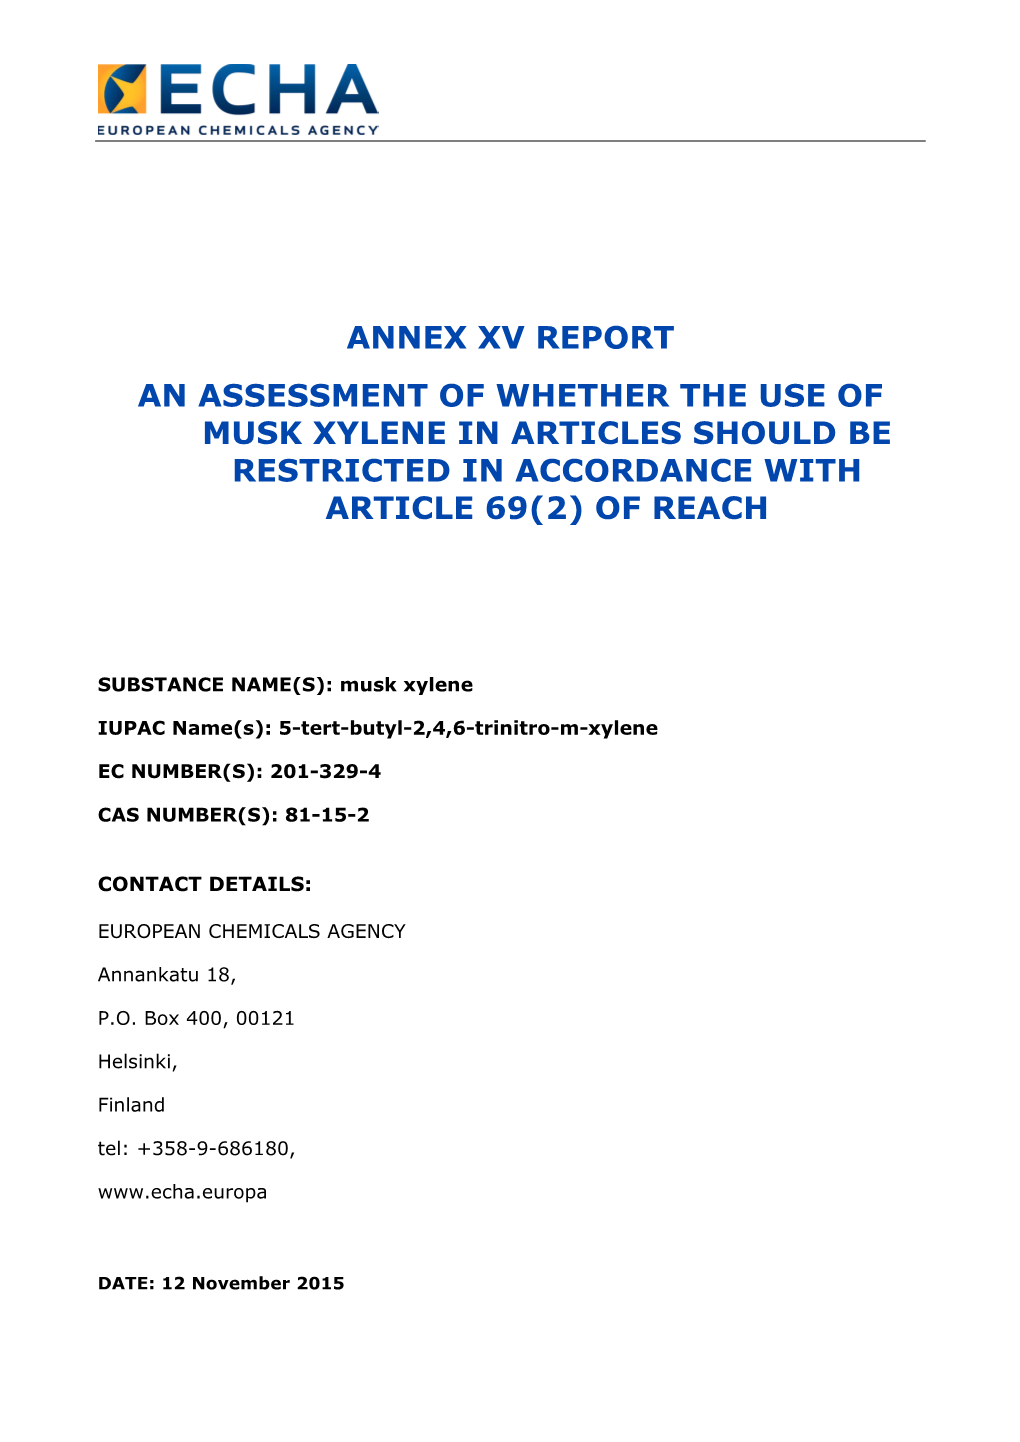 Proposal for a Reporting Format for Annex XV Restrictions Report